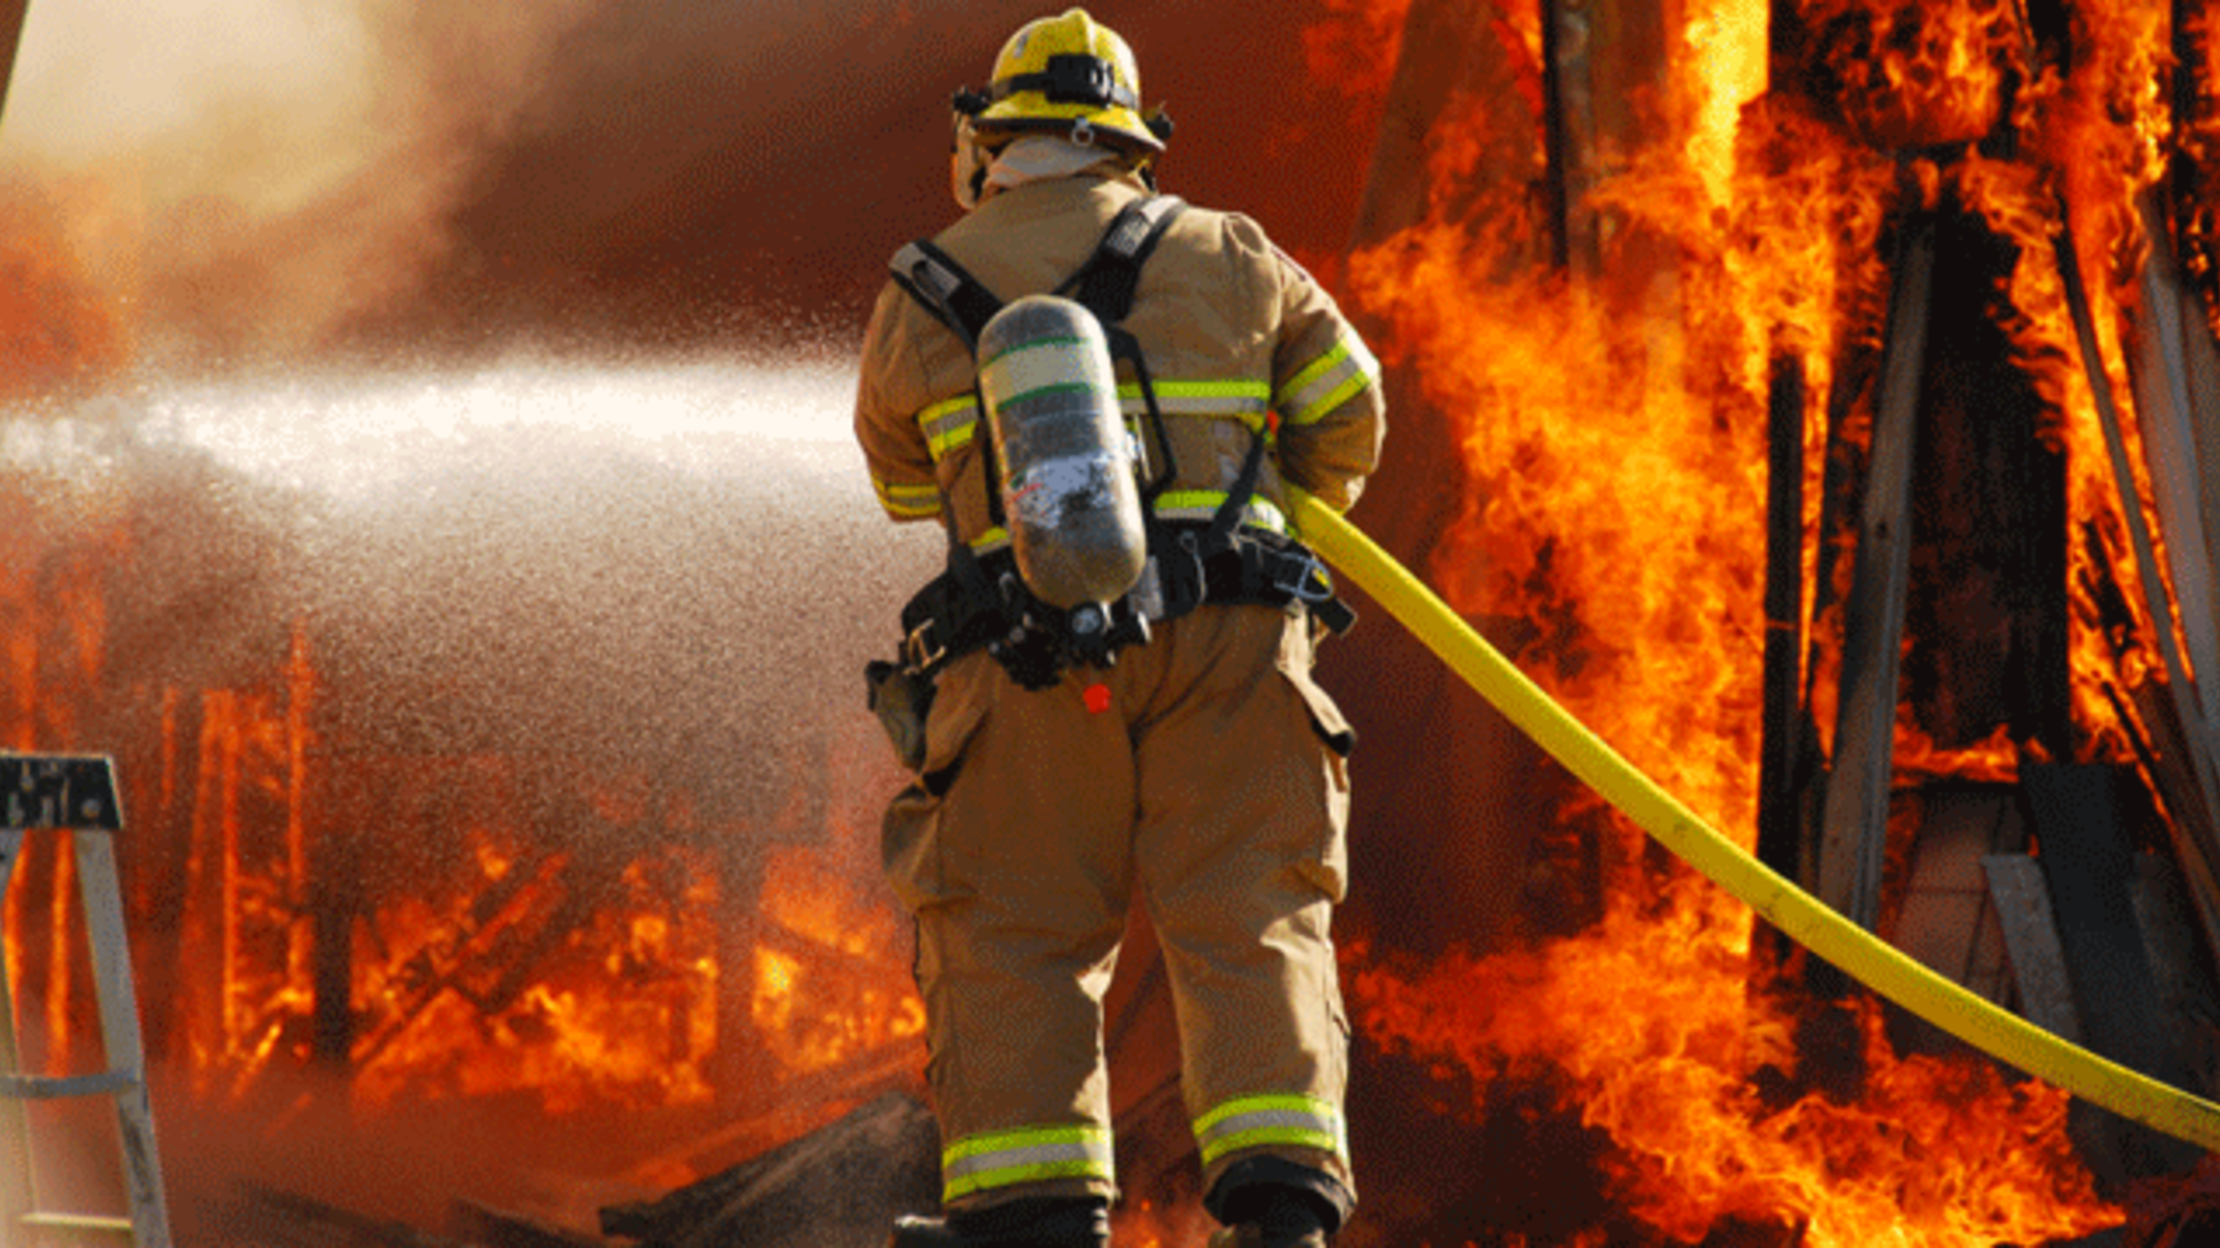 Advanced Training in Fire Fighting